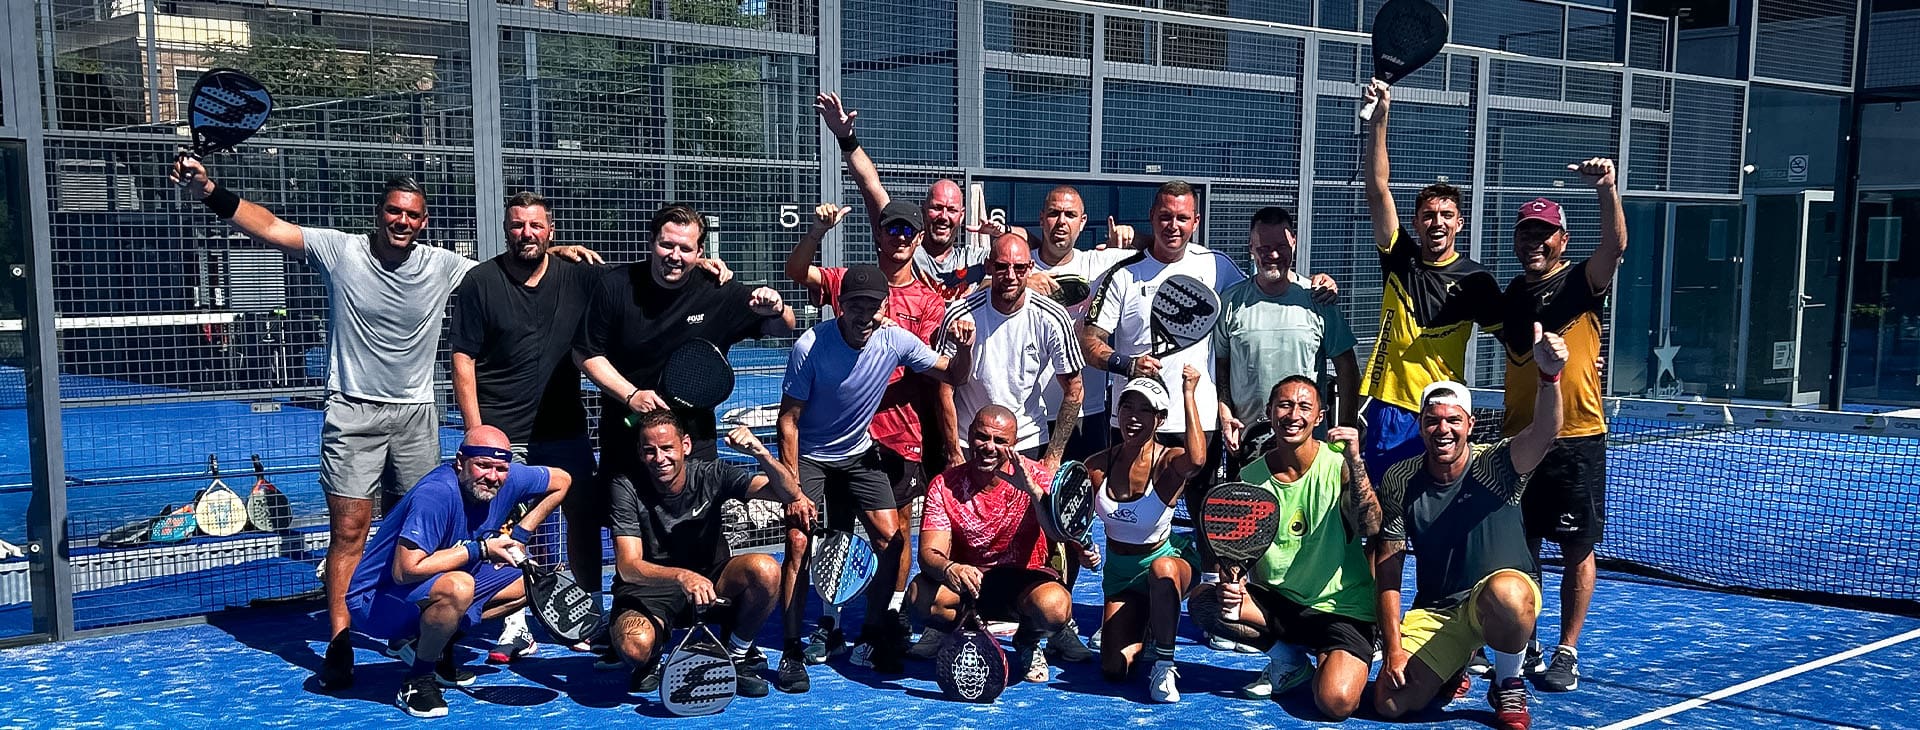 Padel Experience Overview Participant Overview Padel Academy, Padel Camps, Holiday, Vacation, Training. Mastering Padel